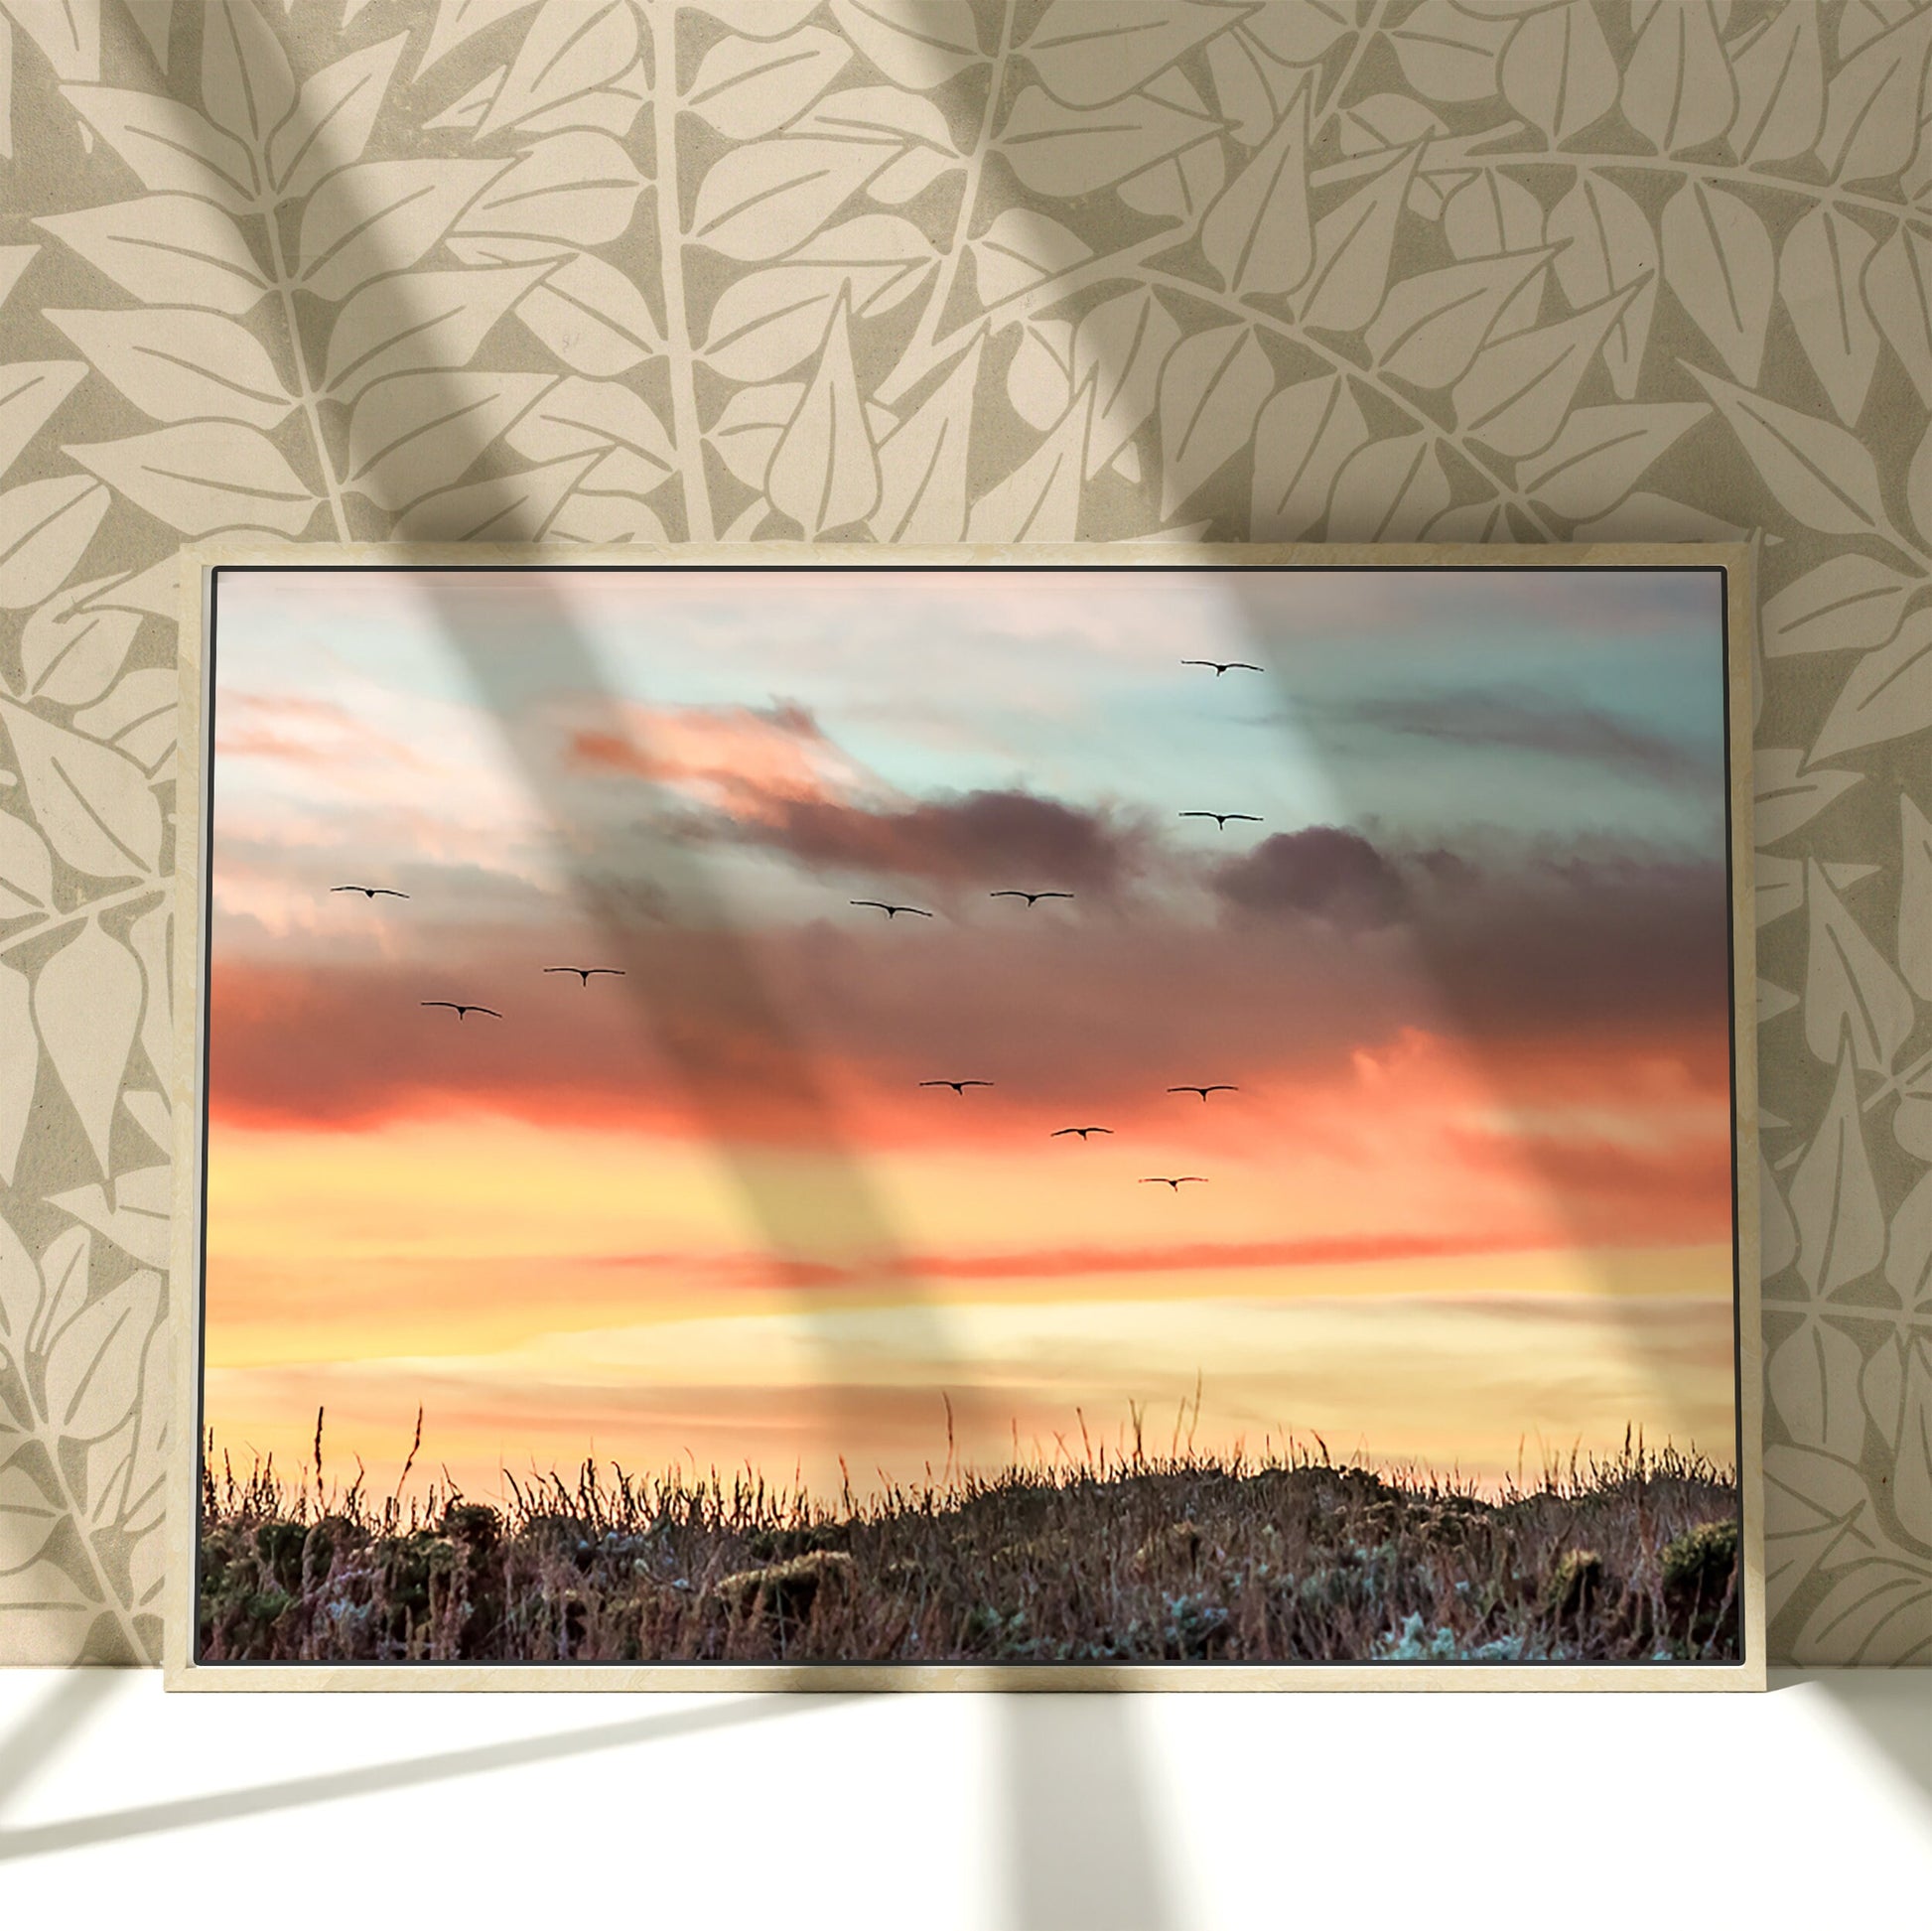 a painting of a sunset with birds flying in the sky